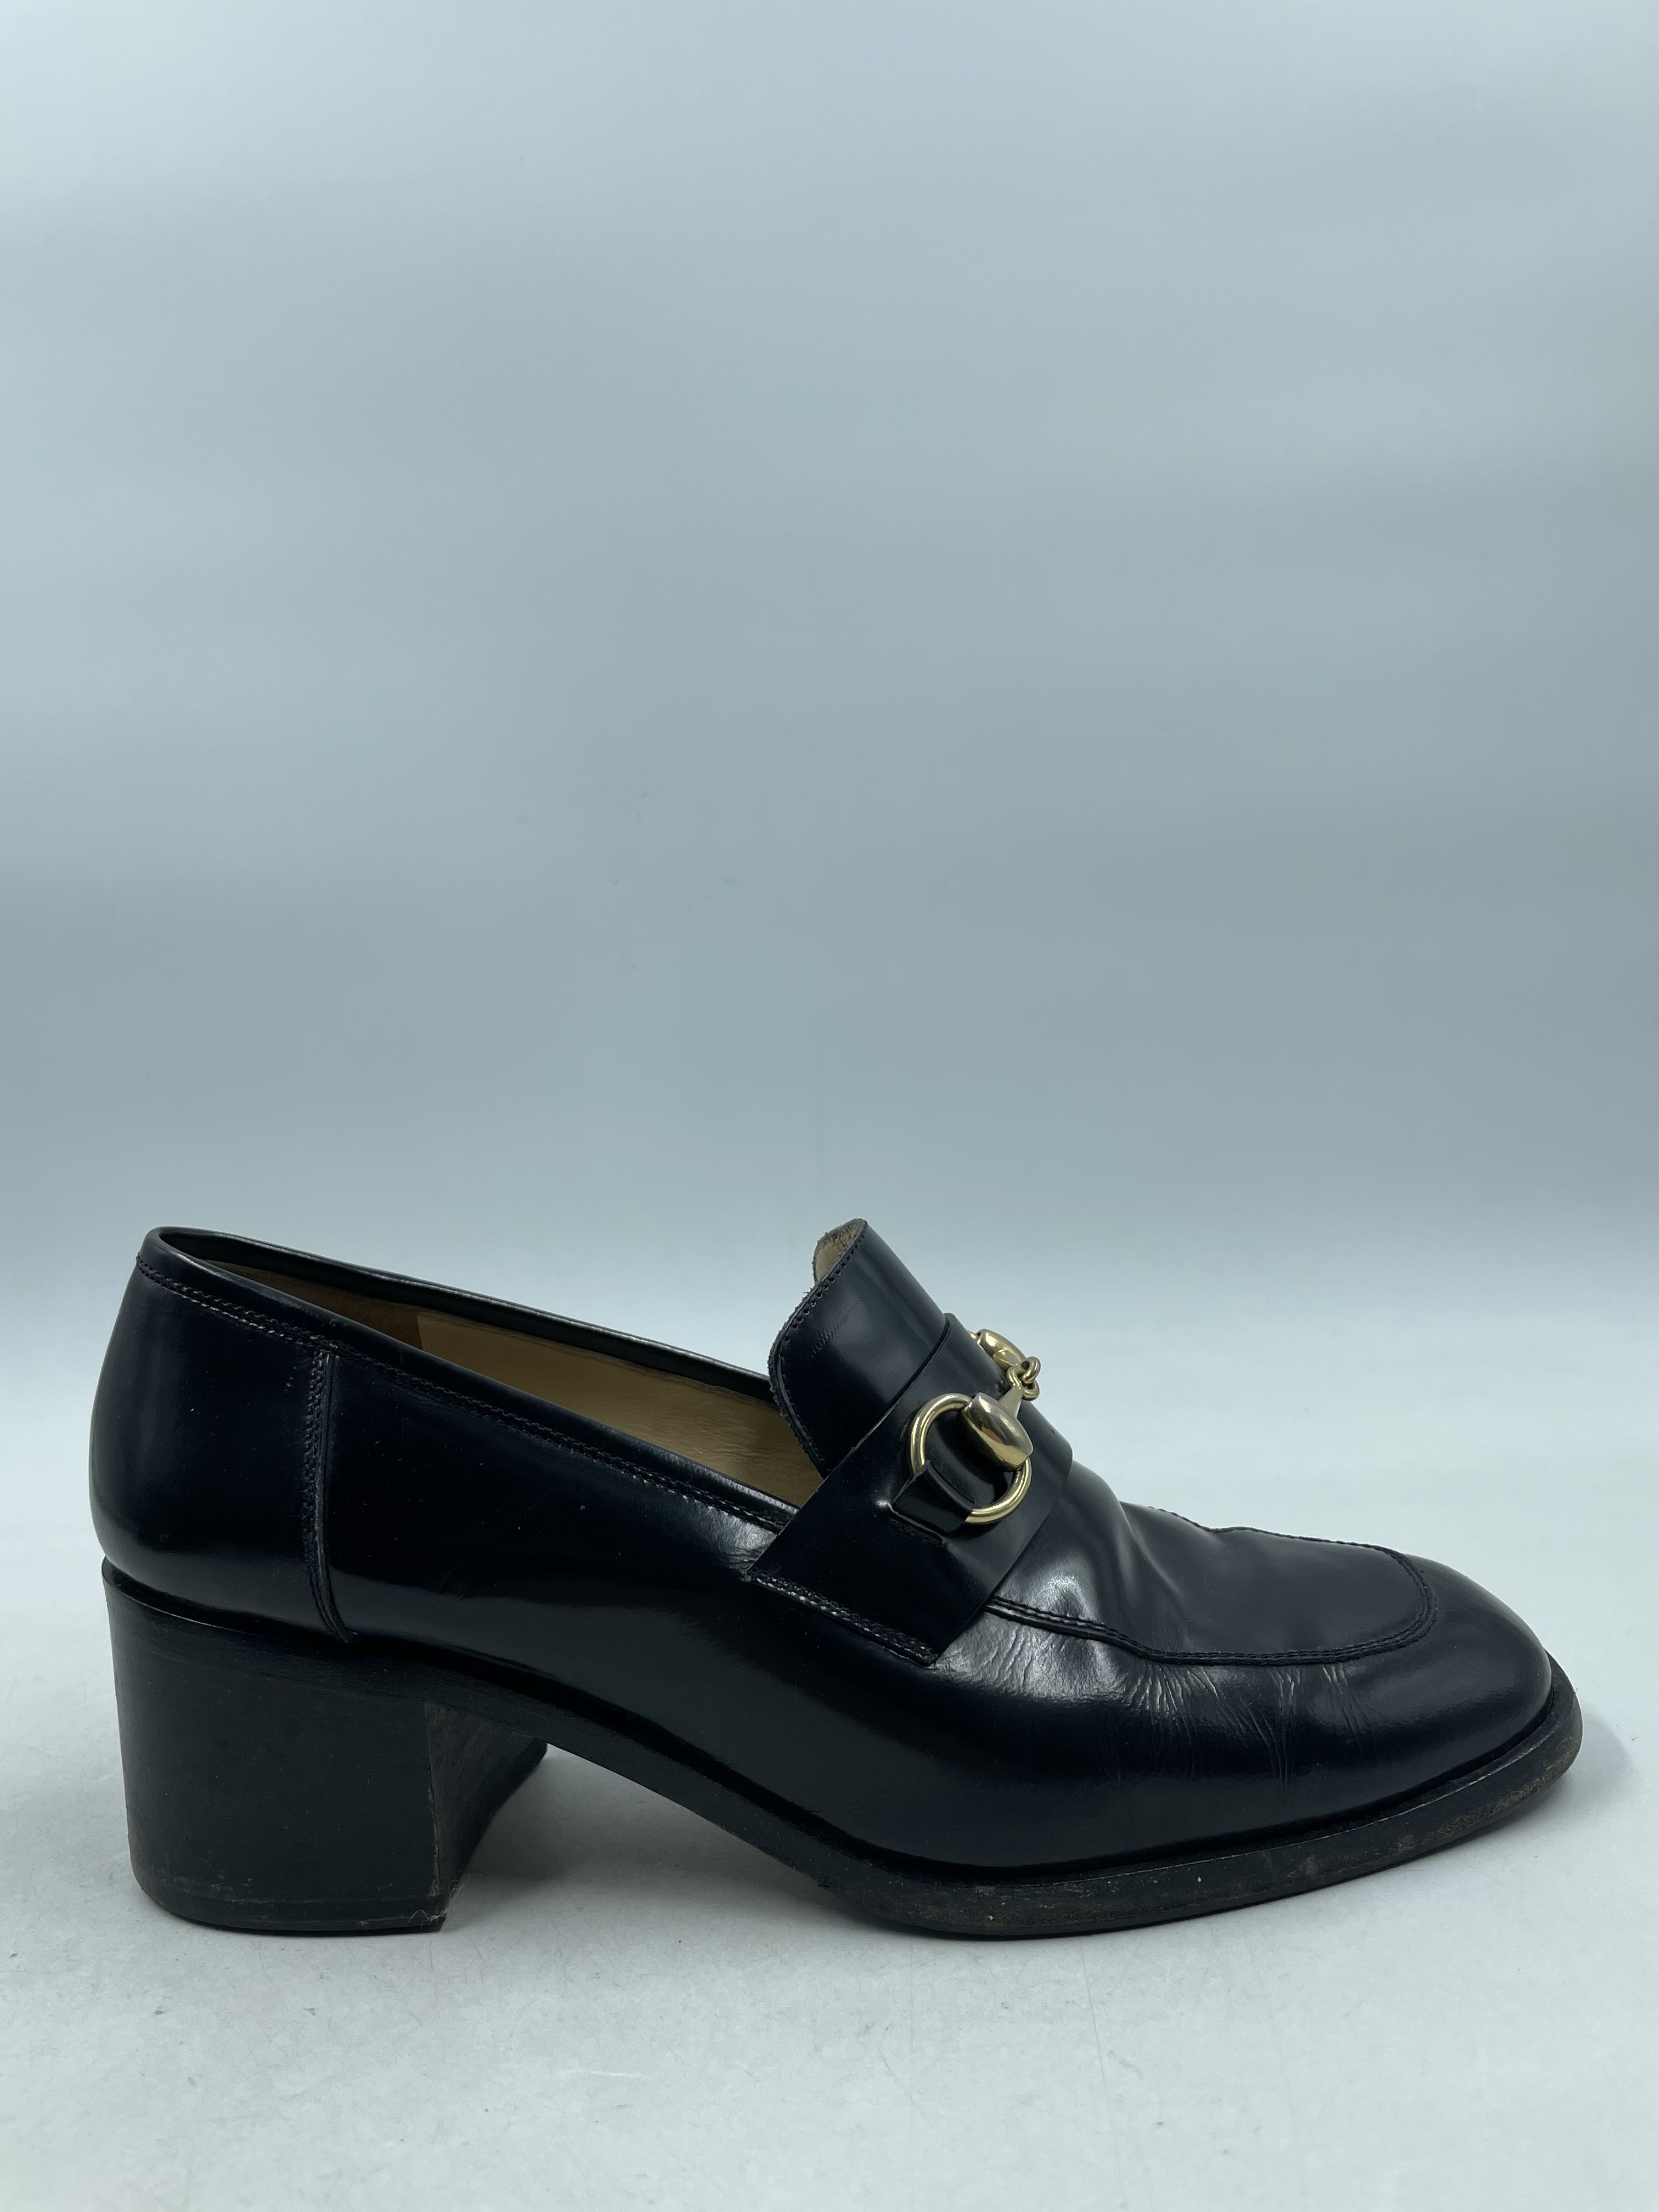 Buy the Authentic Gucci Horsebit Loafers W 8.5B | GoodwillFinds